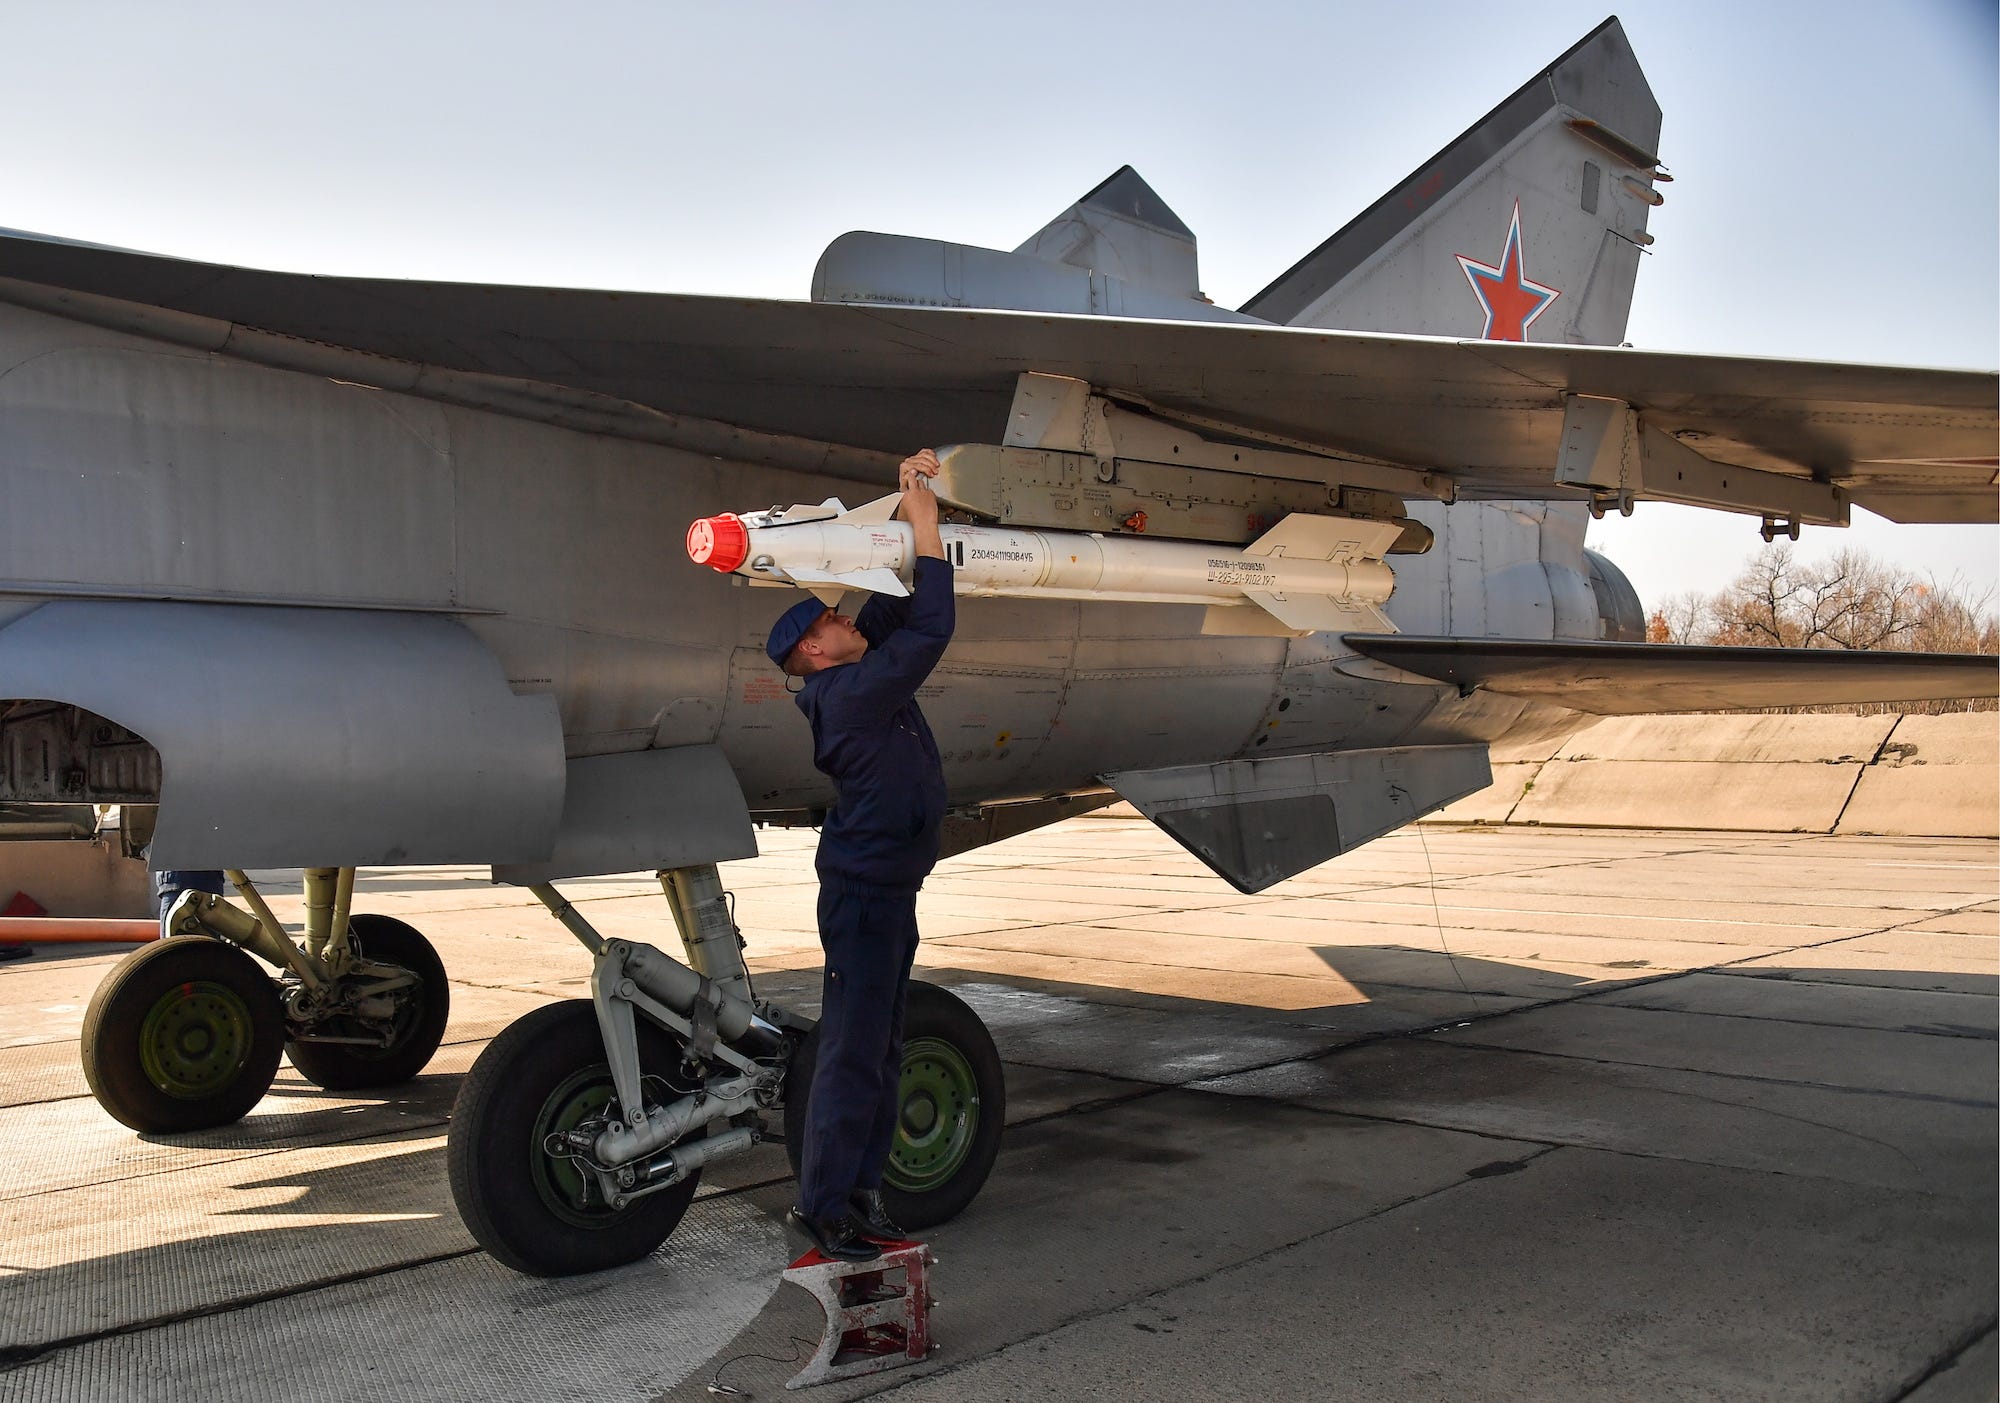 Russia R-73 air-to-air missile on a MiG-31BM